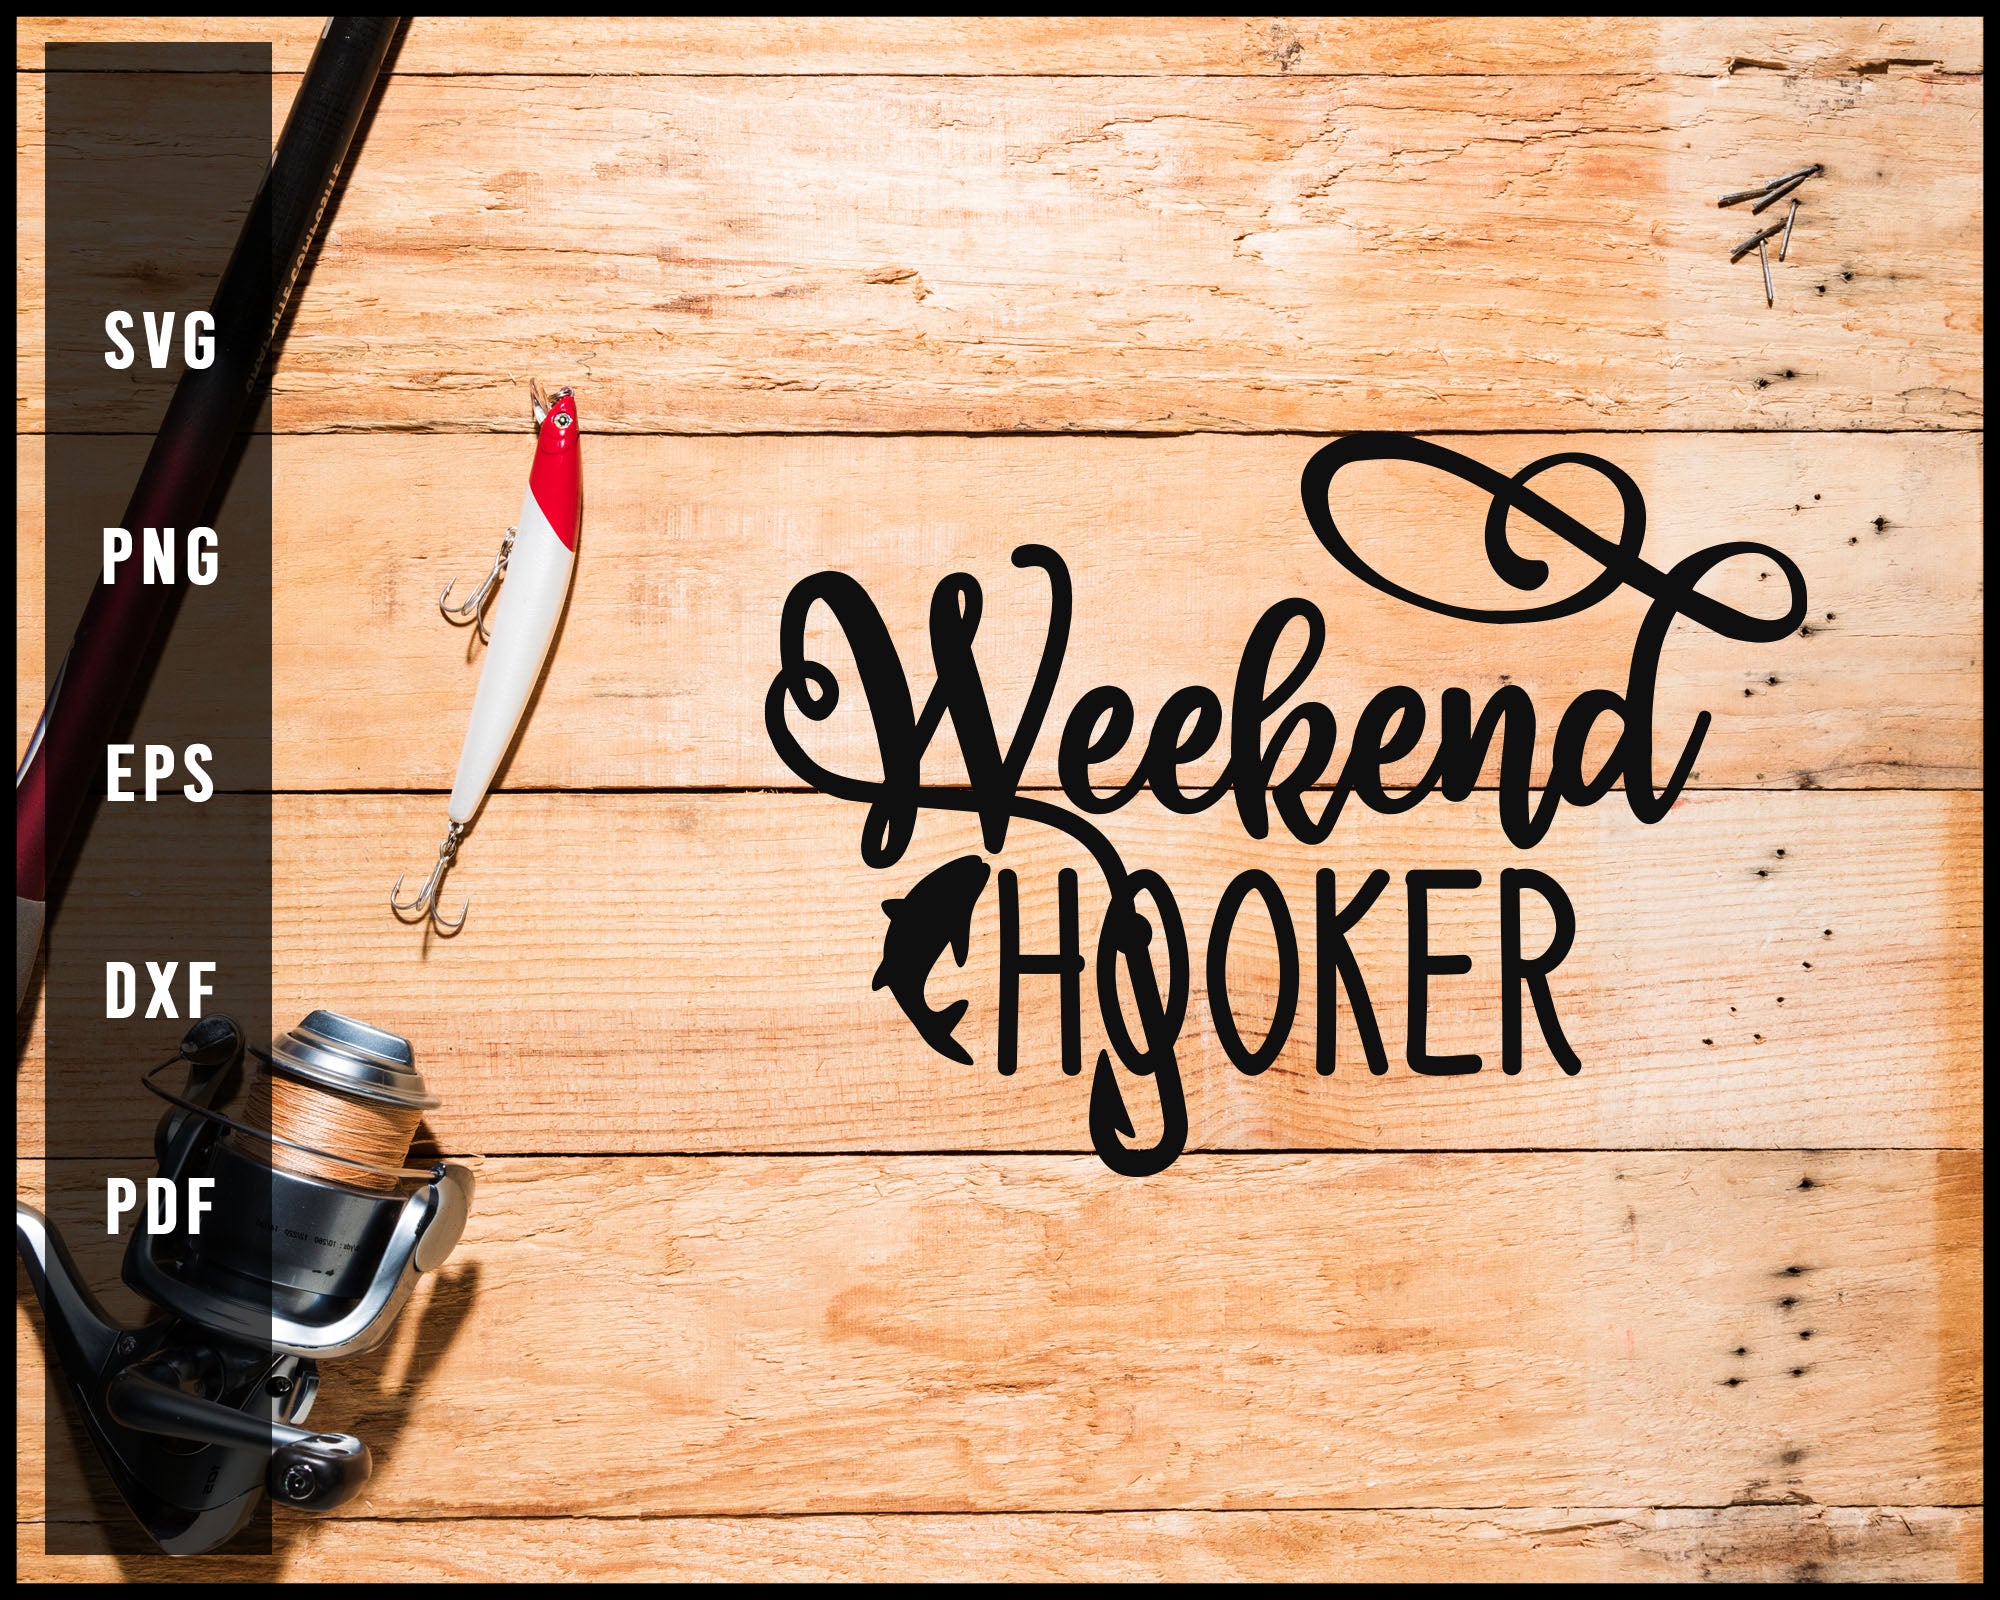 Weekend Hooker svg png Silhouette Designs For Cricut And Printable Files